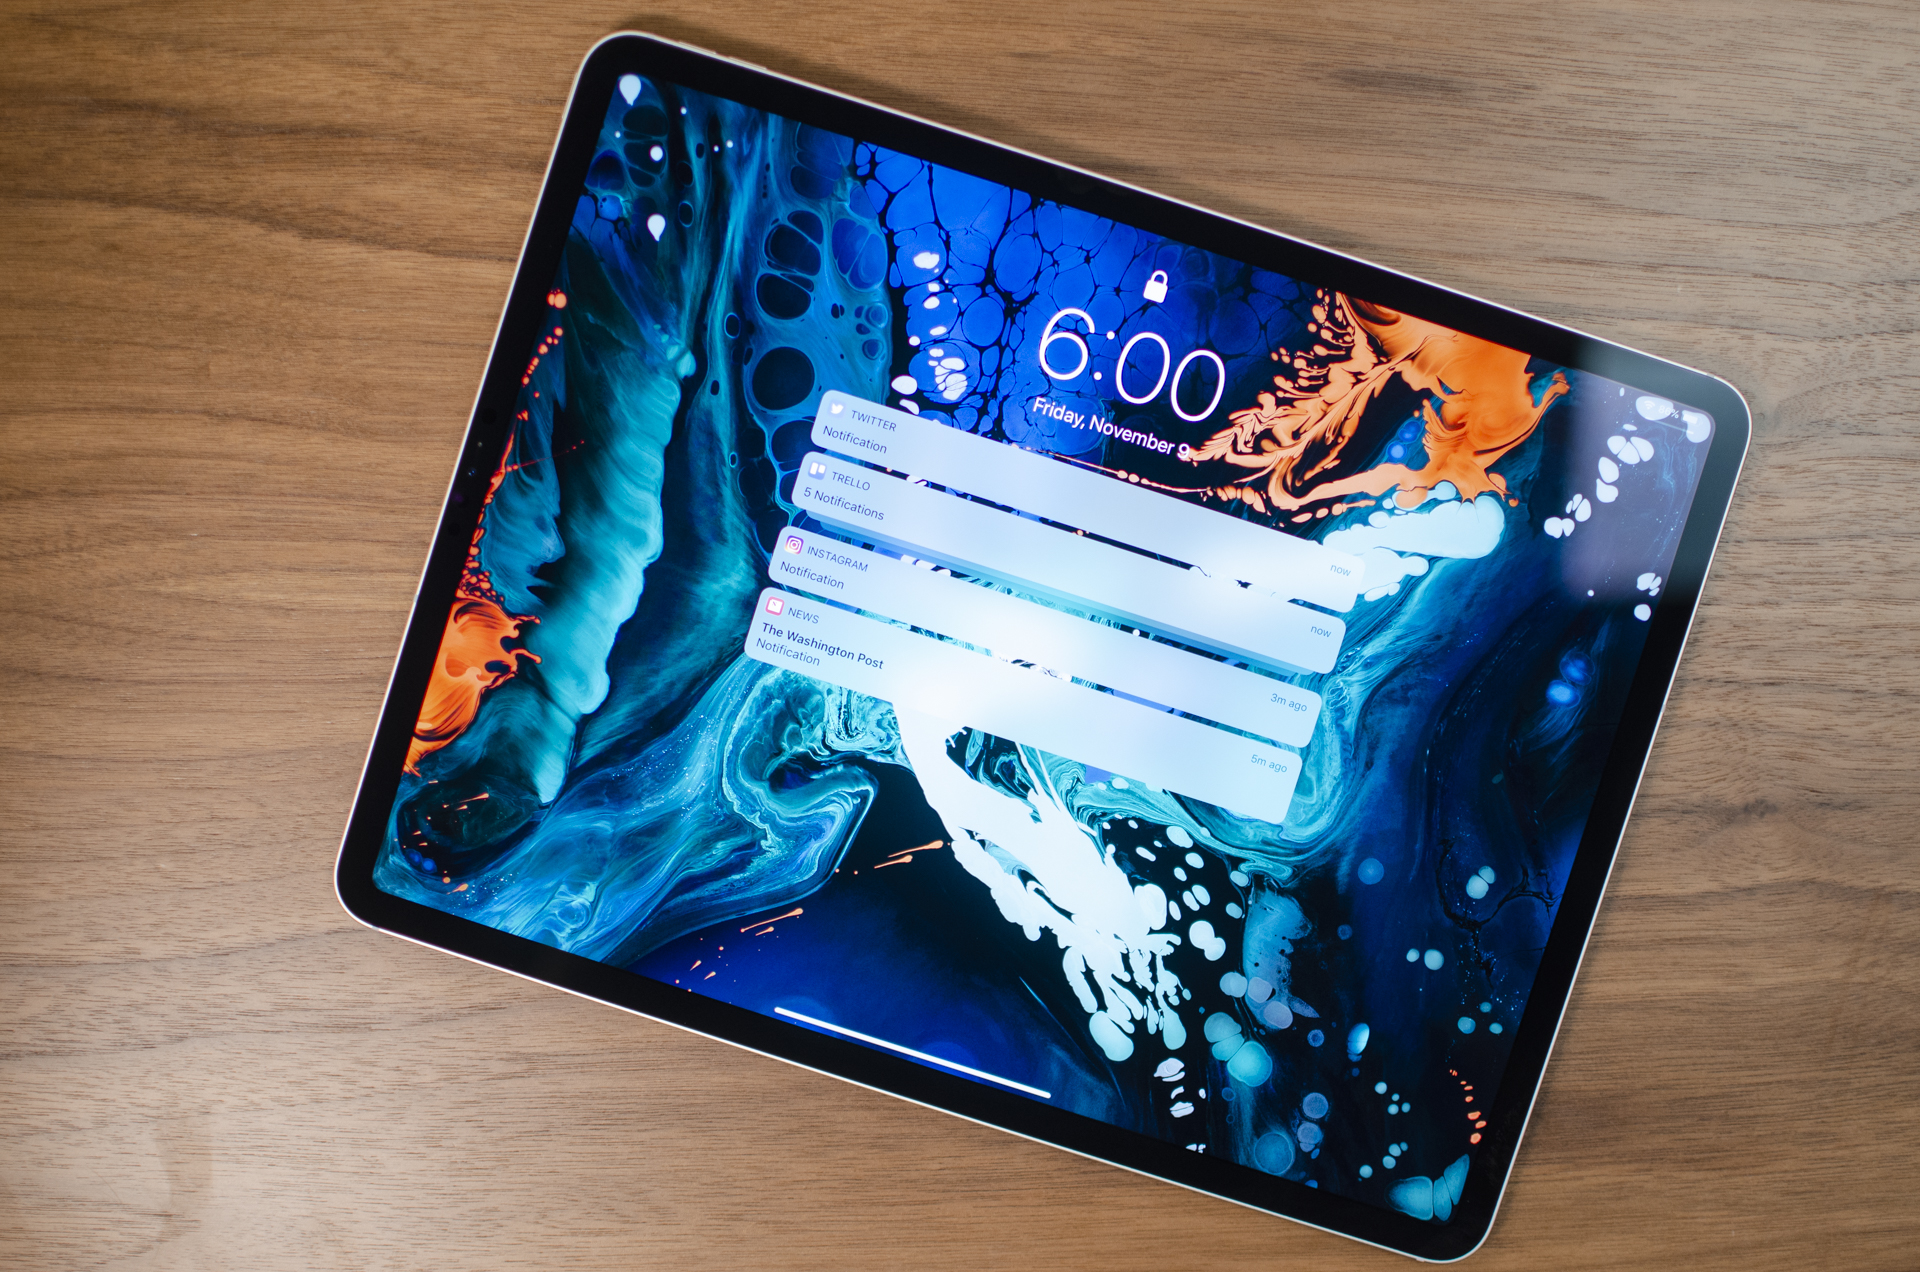 Review: 2018 iPad with Apple Pencil support might replace your iPad Pro